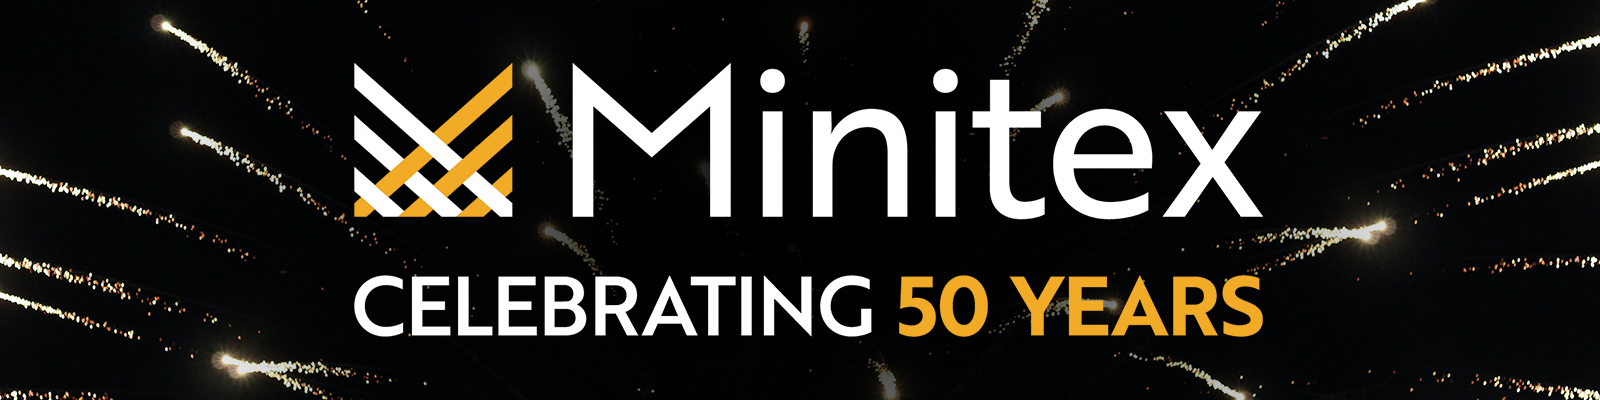 The Minitex logo with the tagline "Celebrating 50 Years" on a photo of fireworks.